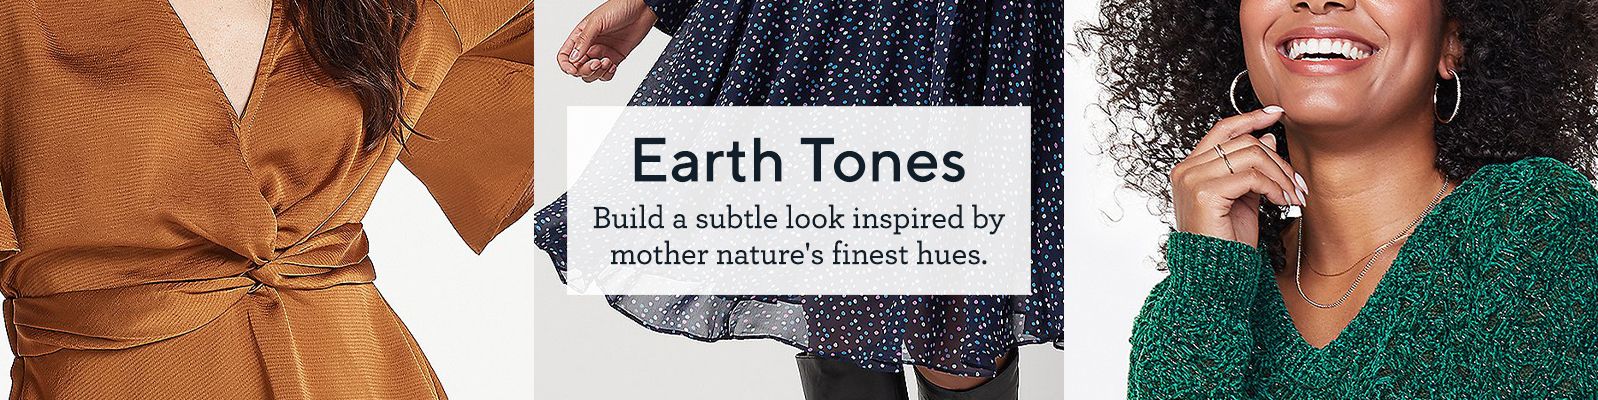 Earth Tones.  Build a subtle look inspired by mother nature's finest hues.